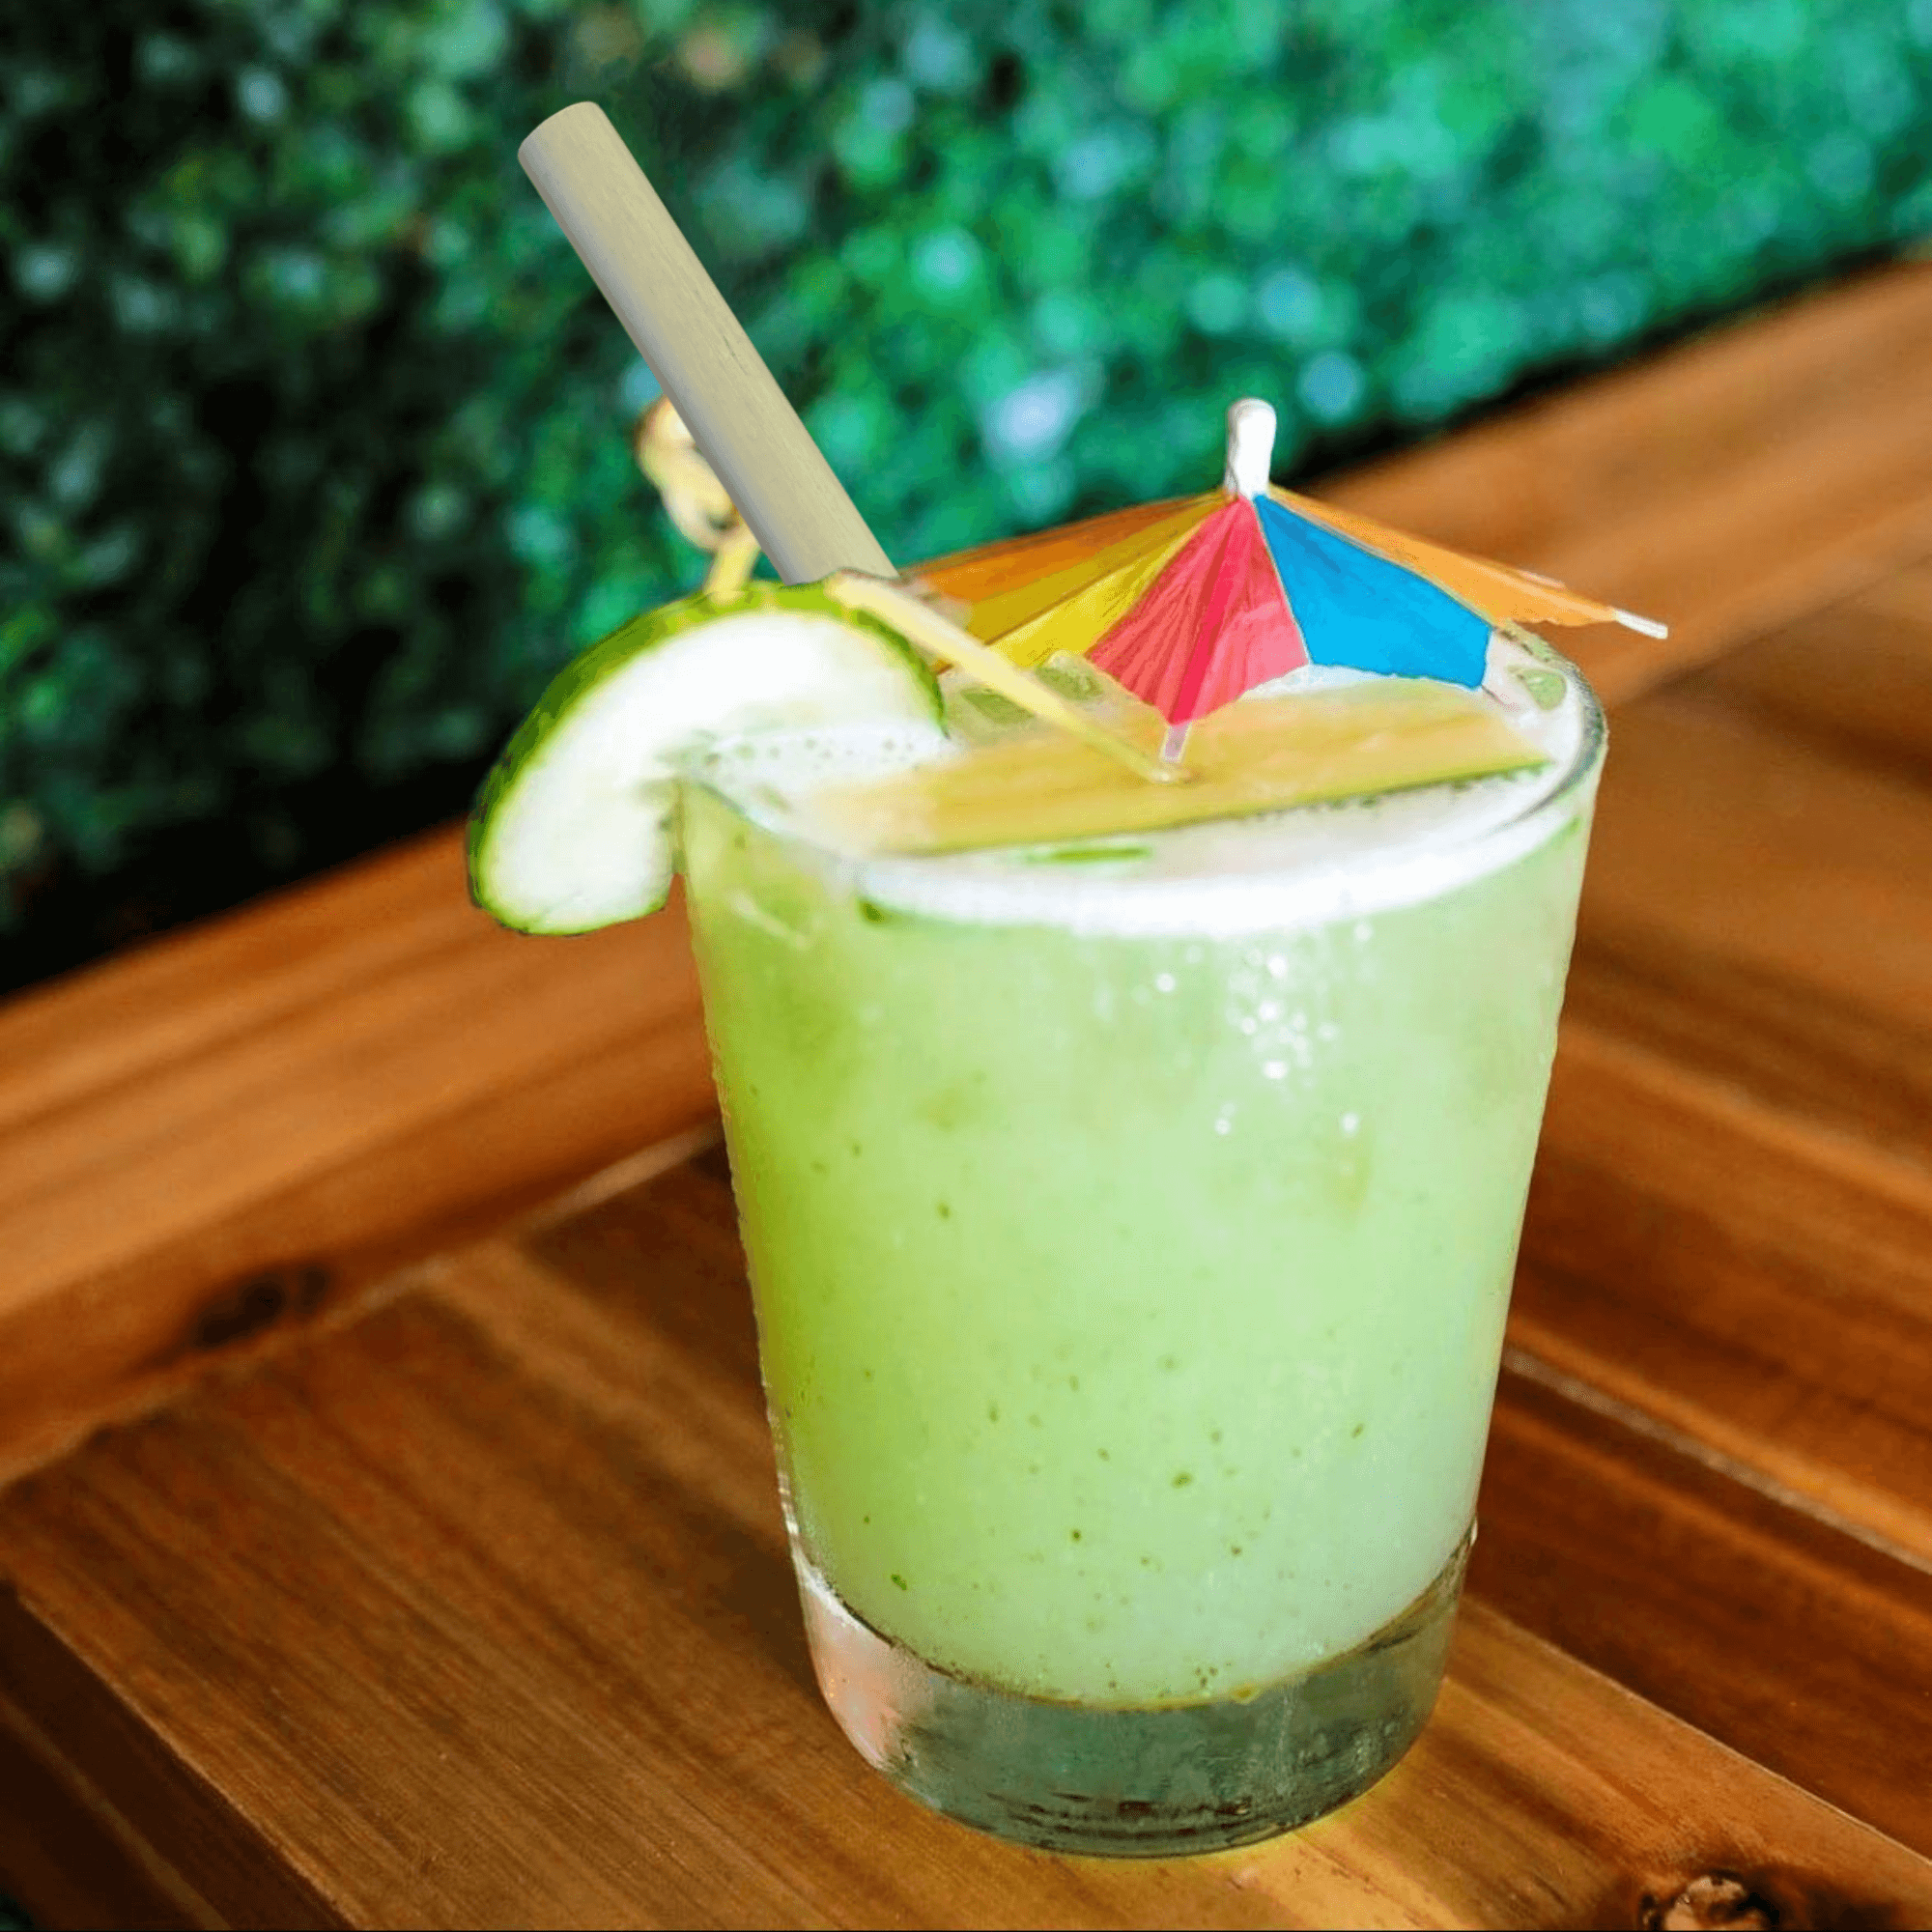 A green iced drink sits on a wooden table, garnished with a cucumber slice and a small colorful cocktail umbrella. A reed straw made from reed stems is inserted into the drink. The background is lush greenery, giving a fresh and tropical vibe, while the wooden surface provides a natural, rustic aesthetic.